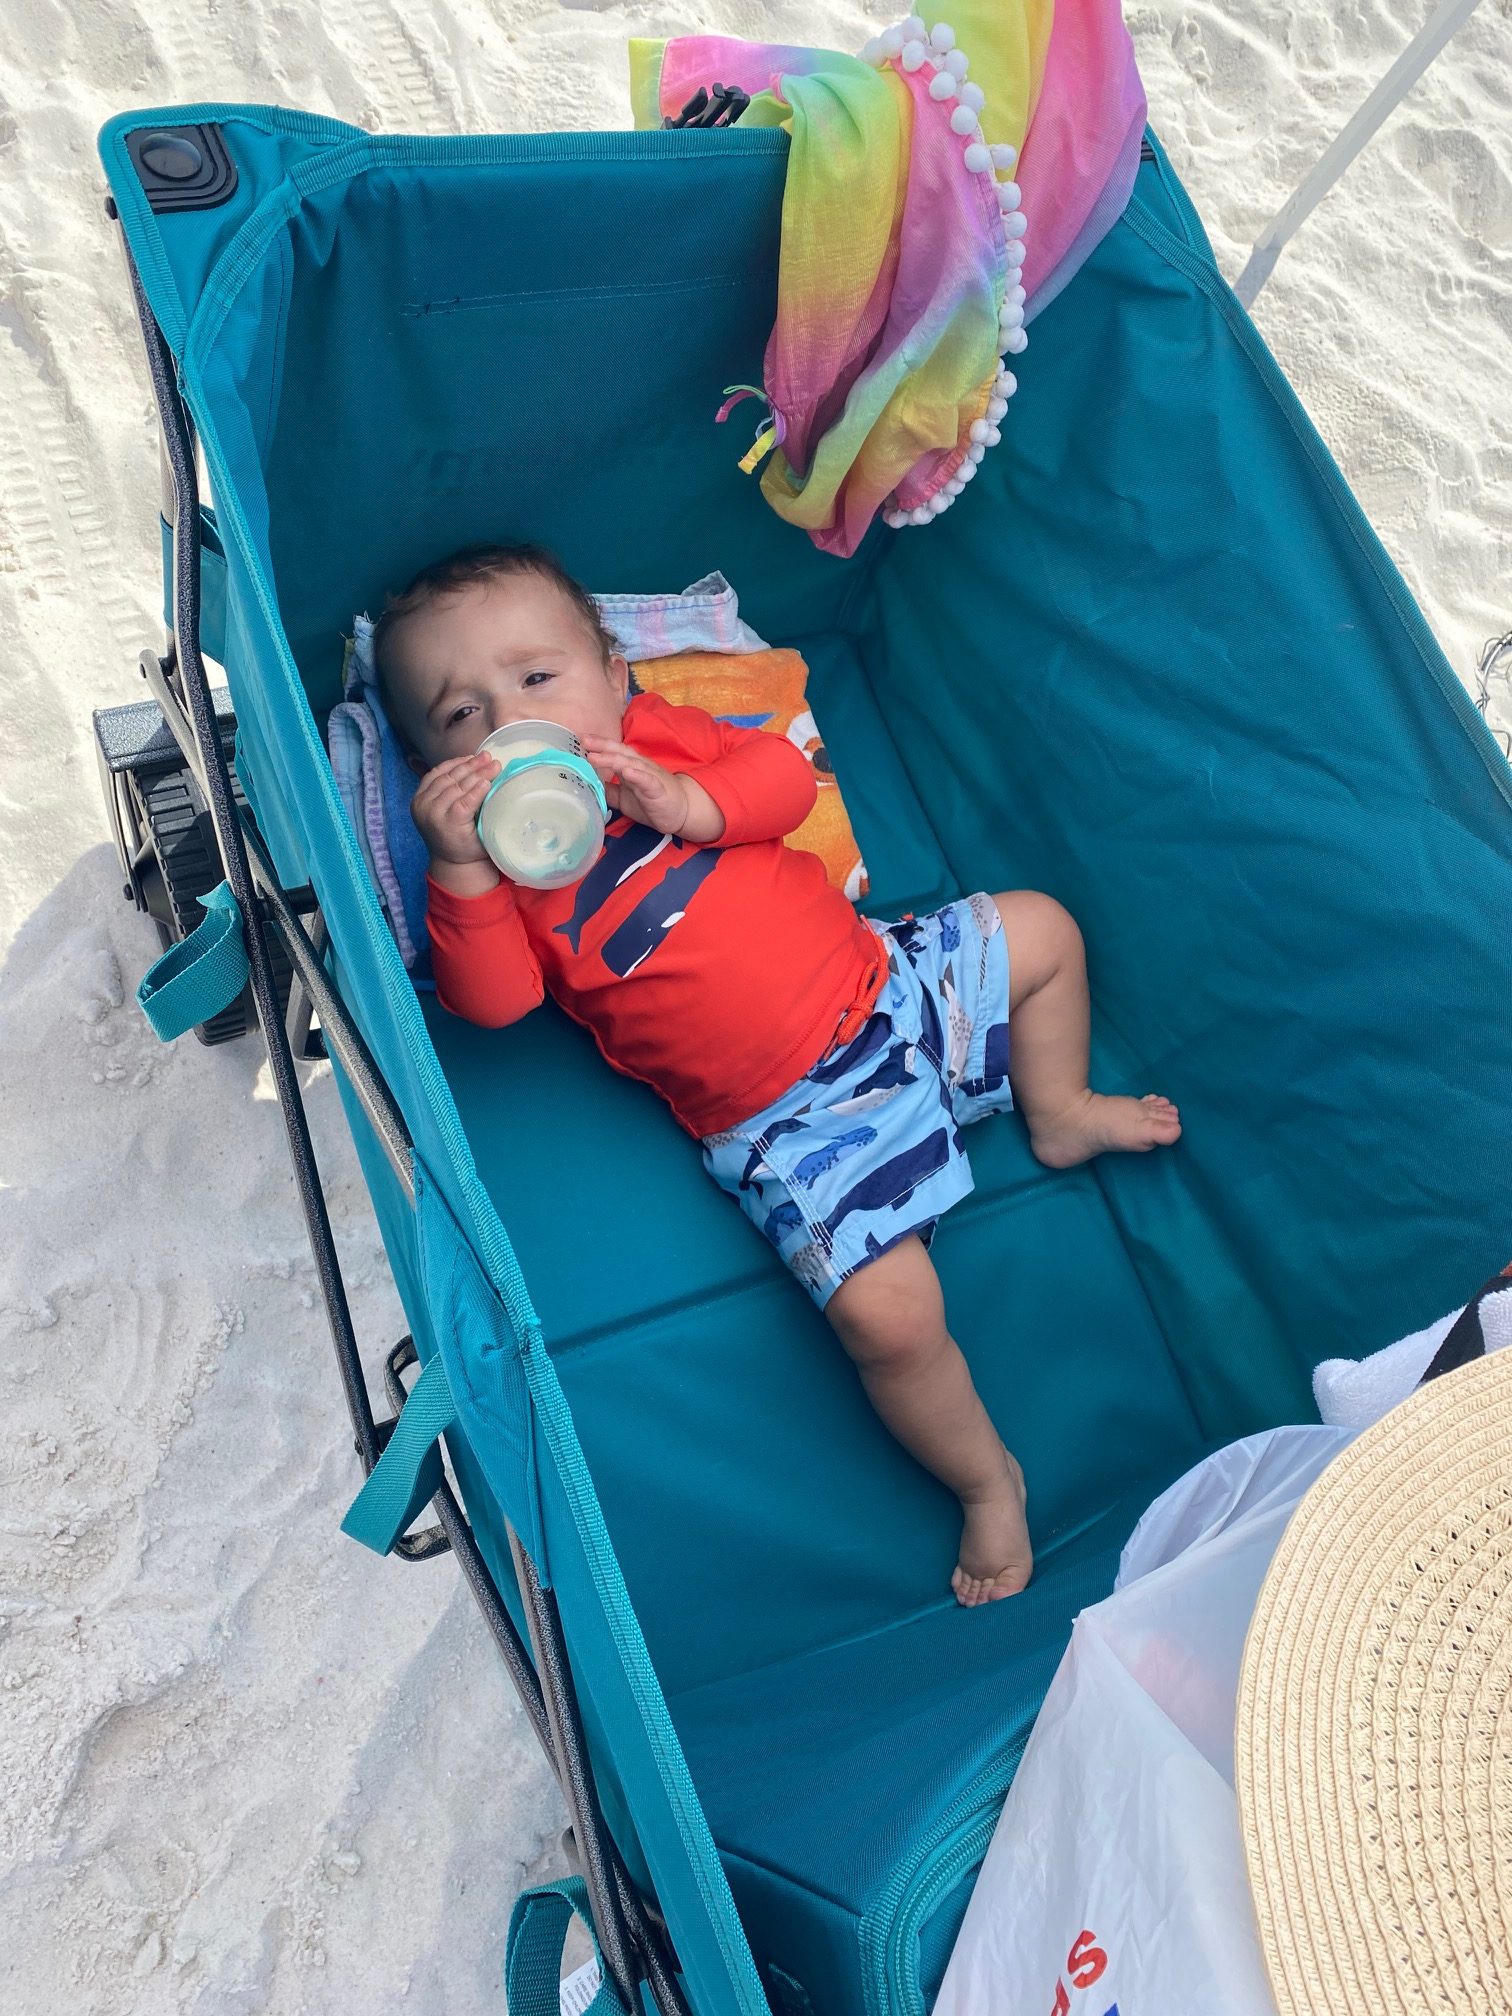 Wagon for beach is a must with a toddler